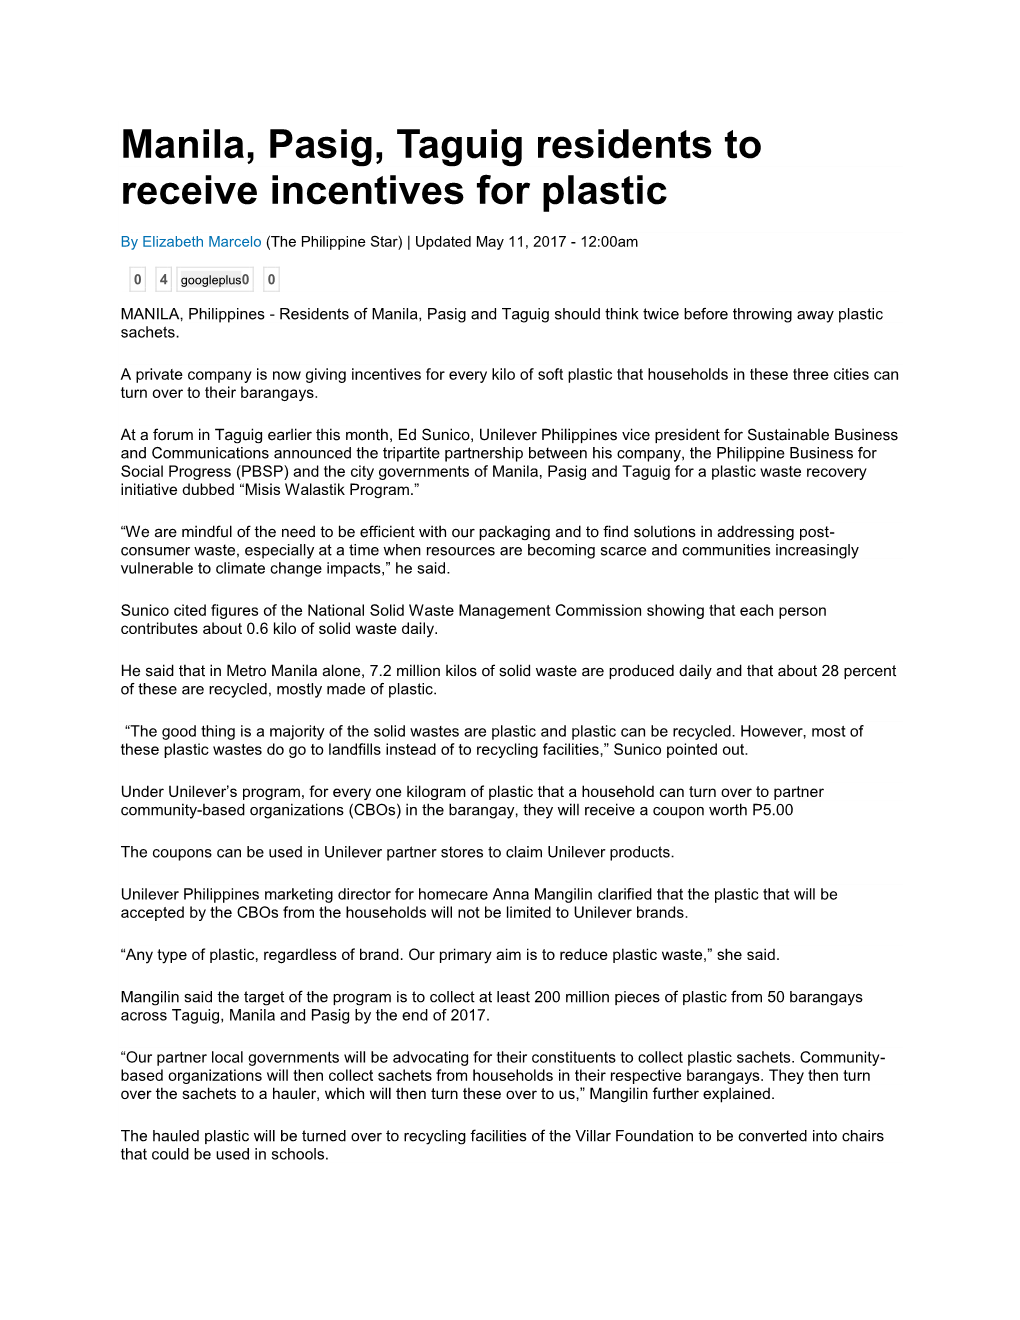 Manila, Pasig, Taguig Residents to Receive Incentives for Plastic